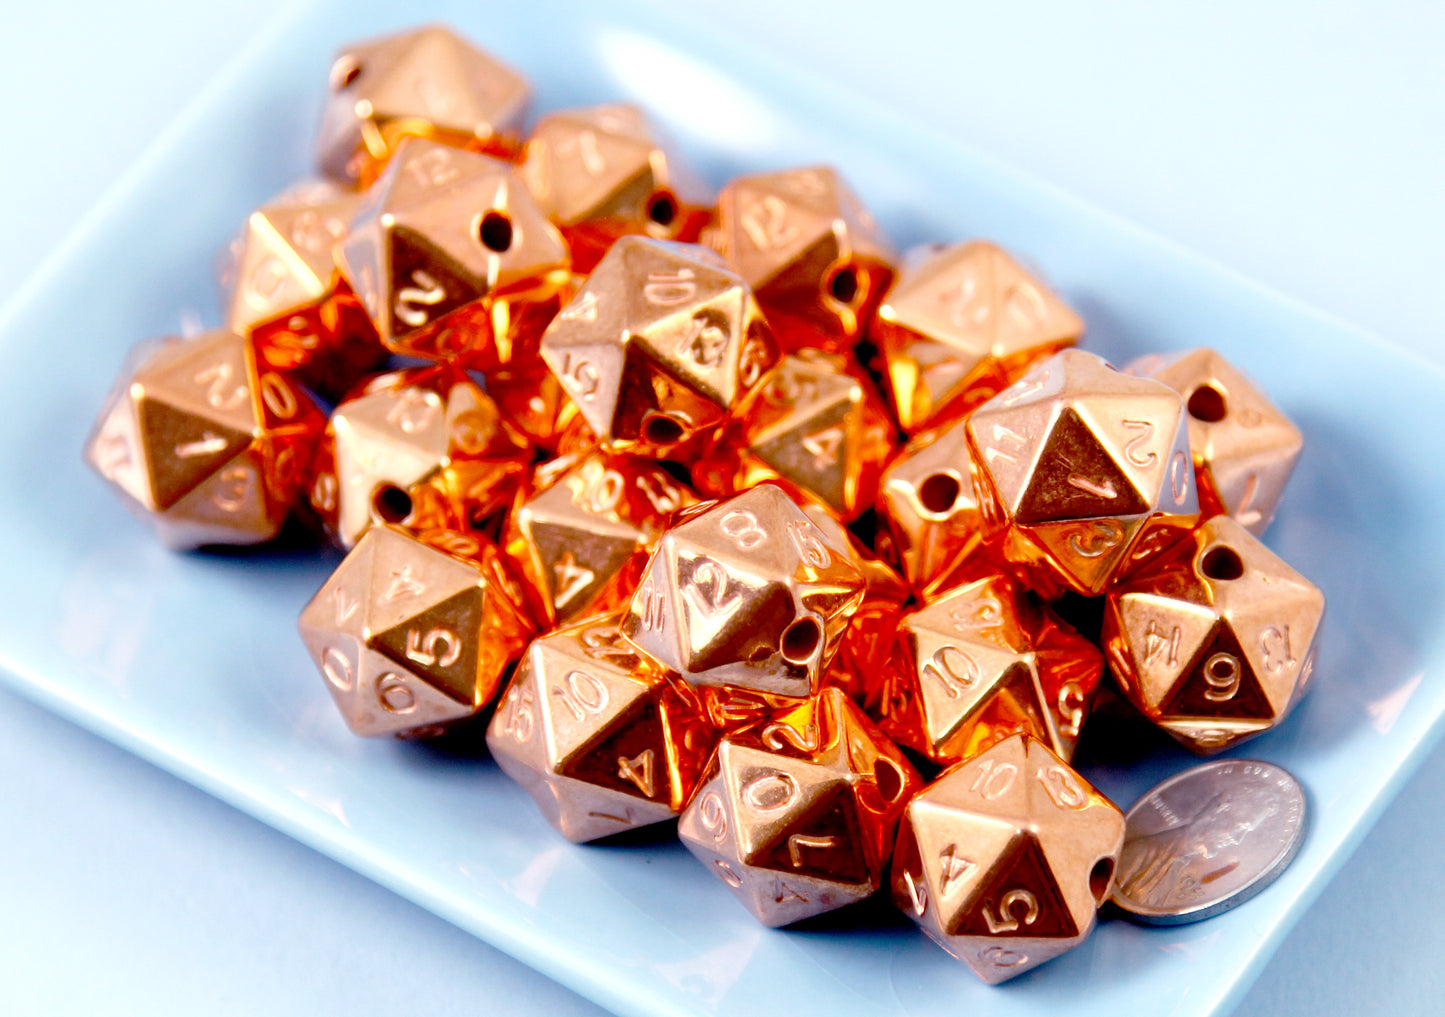 D20 Beads - 10 pc set - 20mm Polyhedral Dice Beads D12 D16 DND Beads - Electroplated Bronze - Drilled with Holes to Easily make Jewelry